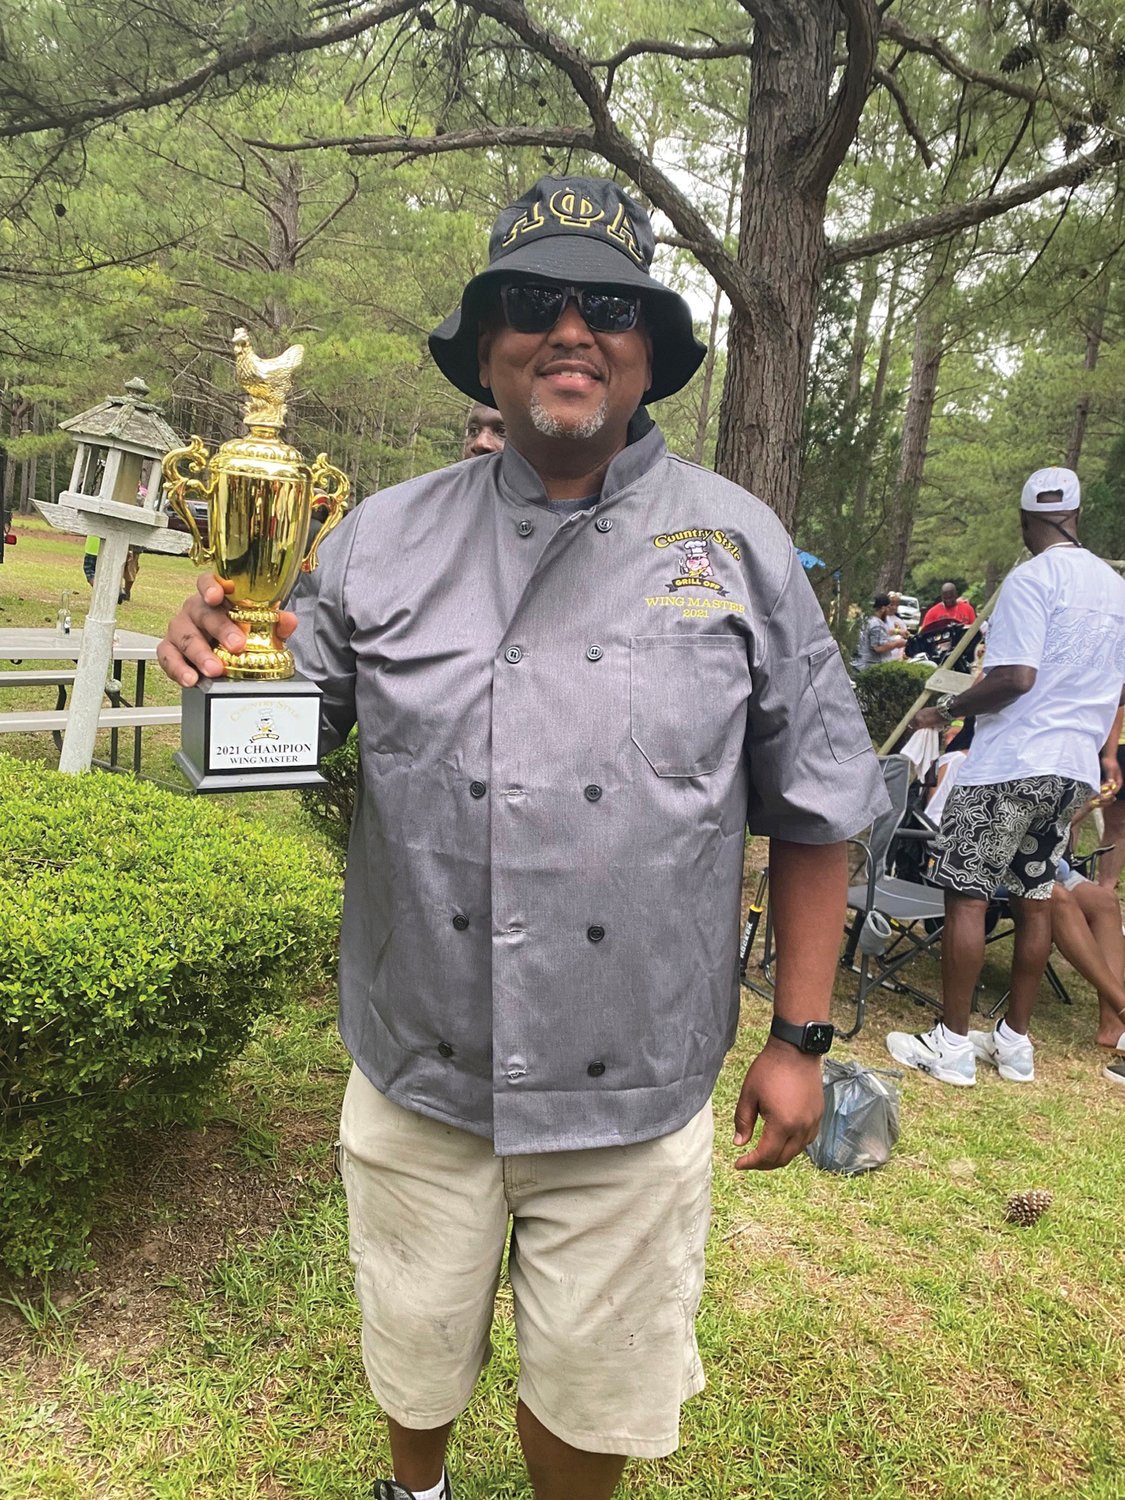 Dorian Smith holds the tropy he won as Barbecue Chicken Master at the Marlboro County Cook-off in South Carolina.